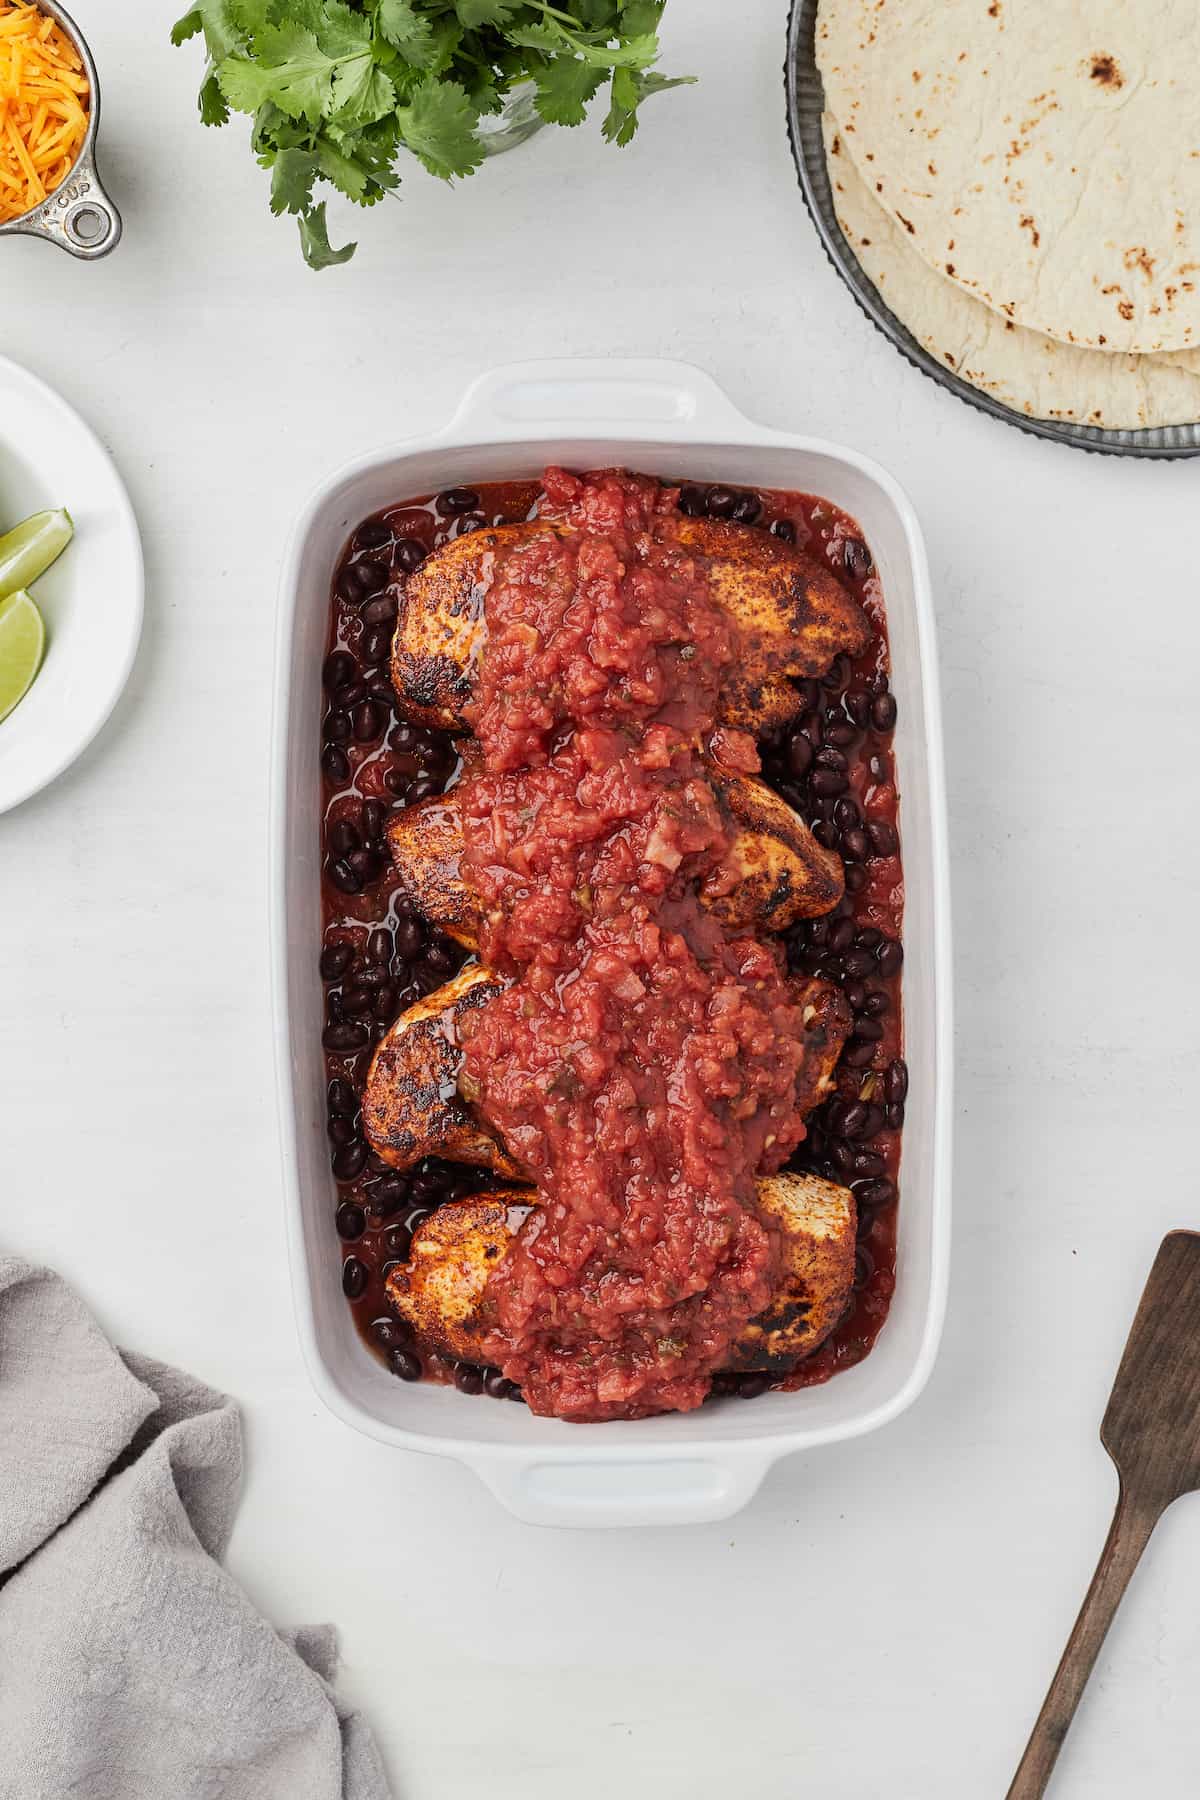 Salsa, beans and chicken layered into a baking dish with more salsa on top of the chicken